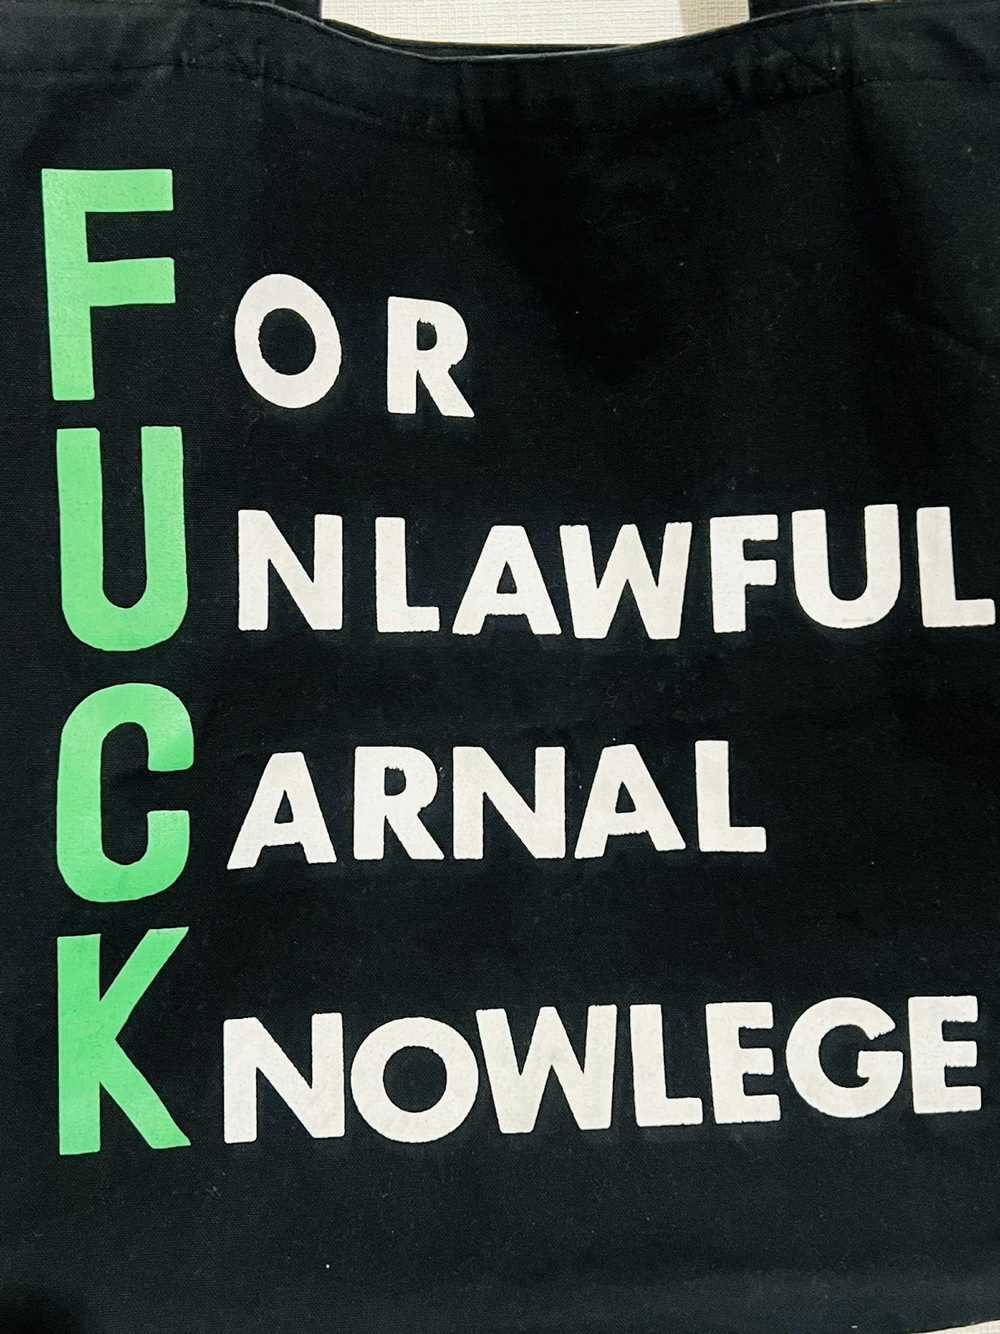 Undercover 🔥 F.U.C.K Tote Bag FOR UNLAWFUL CARNA… - image 3